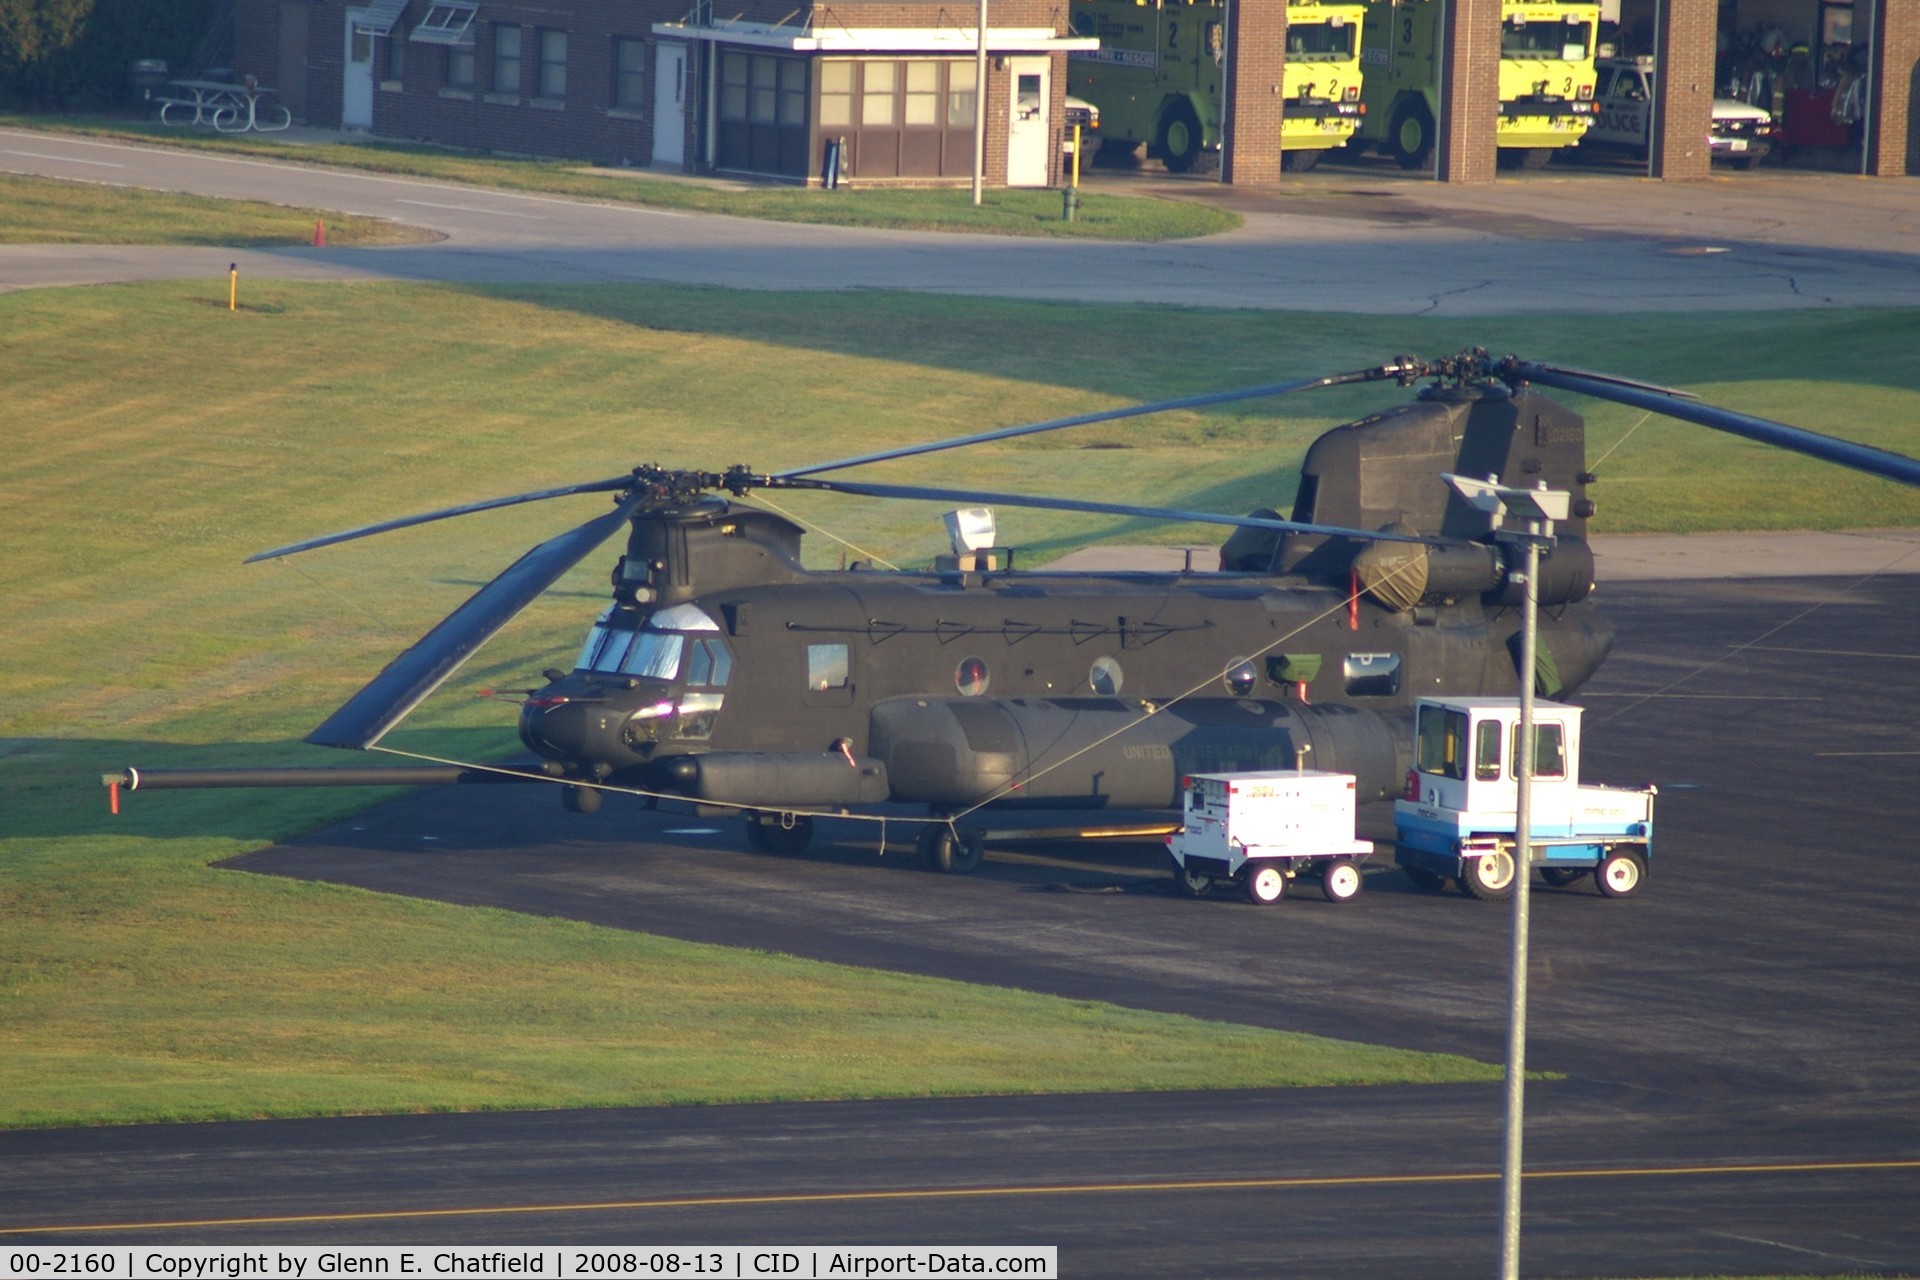 00-2160, 2000 Boeing MH-47G Chinook C/N M.3726, Taken from the control tower